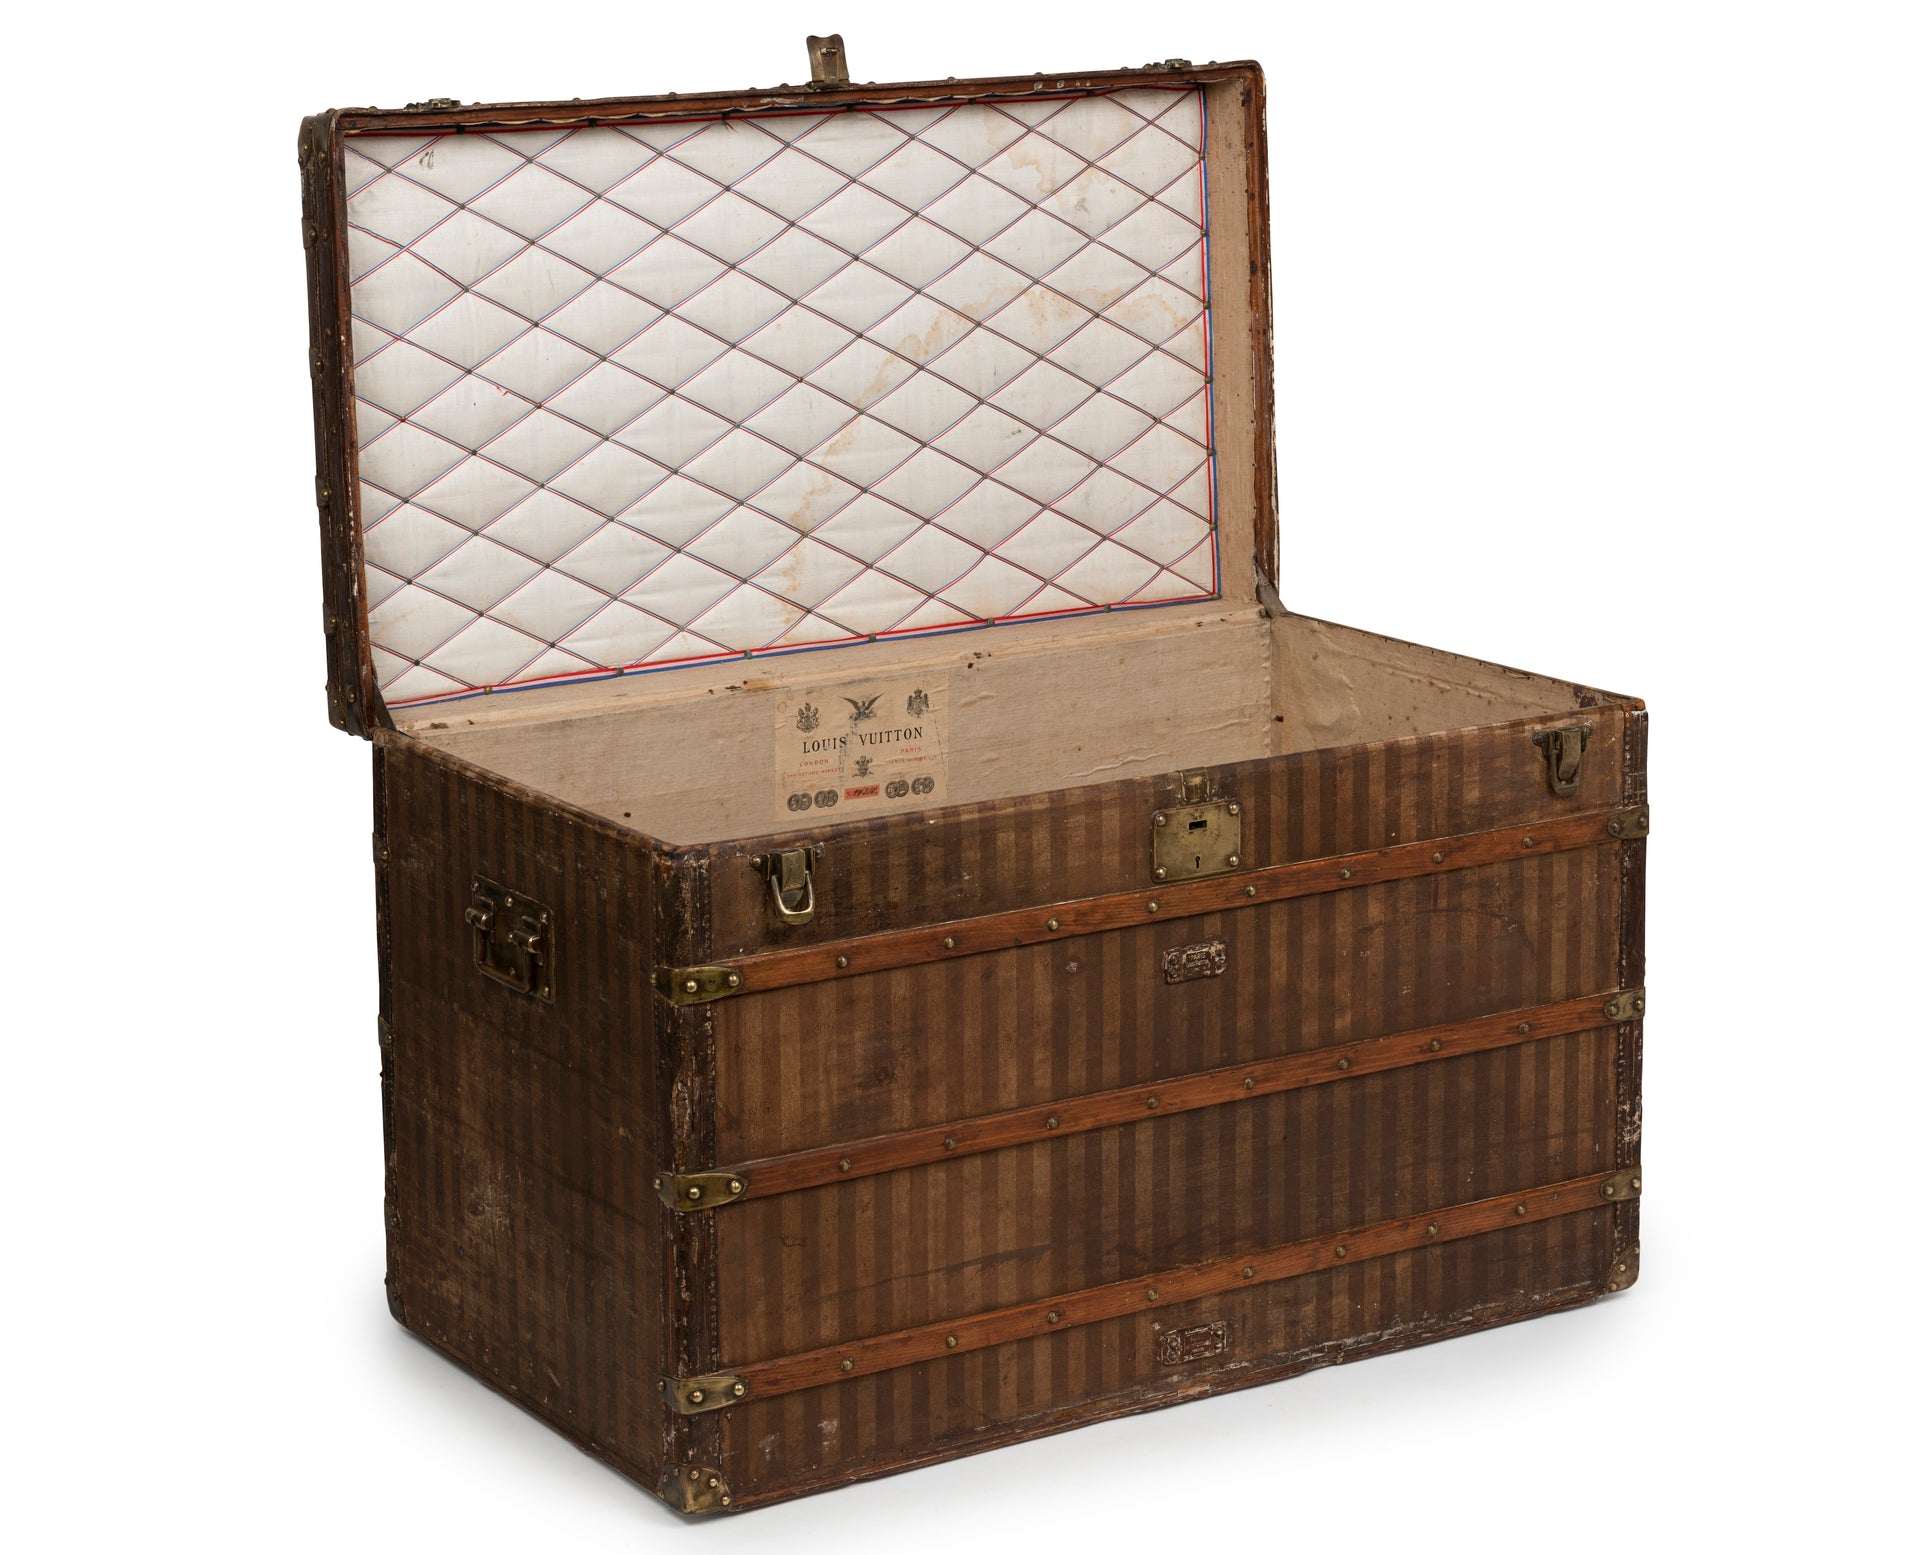 SOLD A large and rare steamer travel trunk, in striped canvas by Louis Vuitton, Paris. French Circa 1890